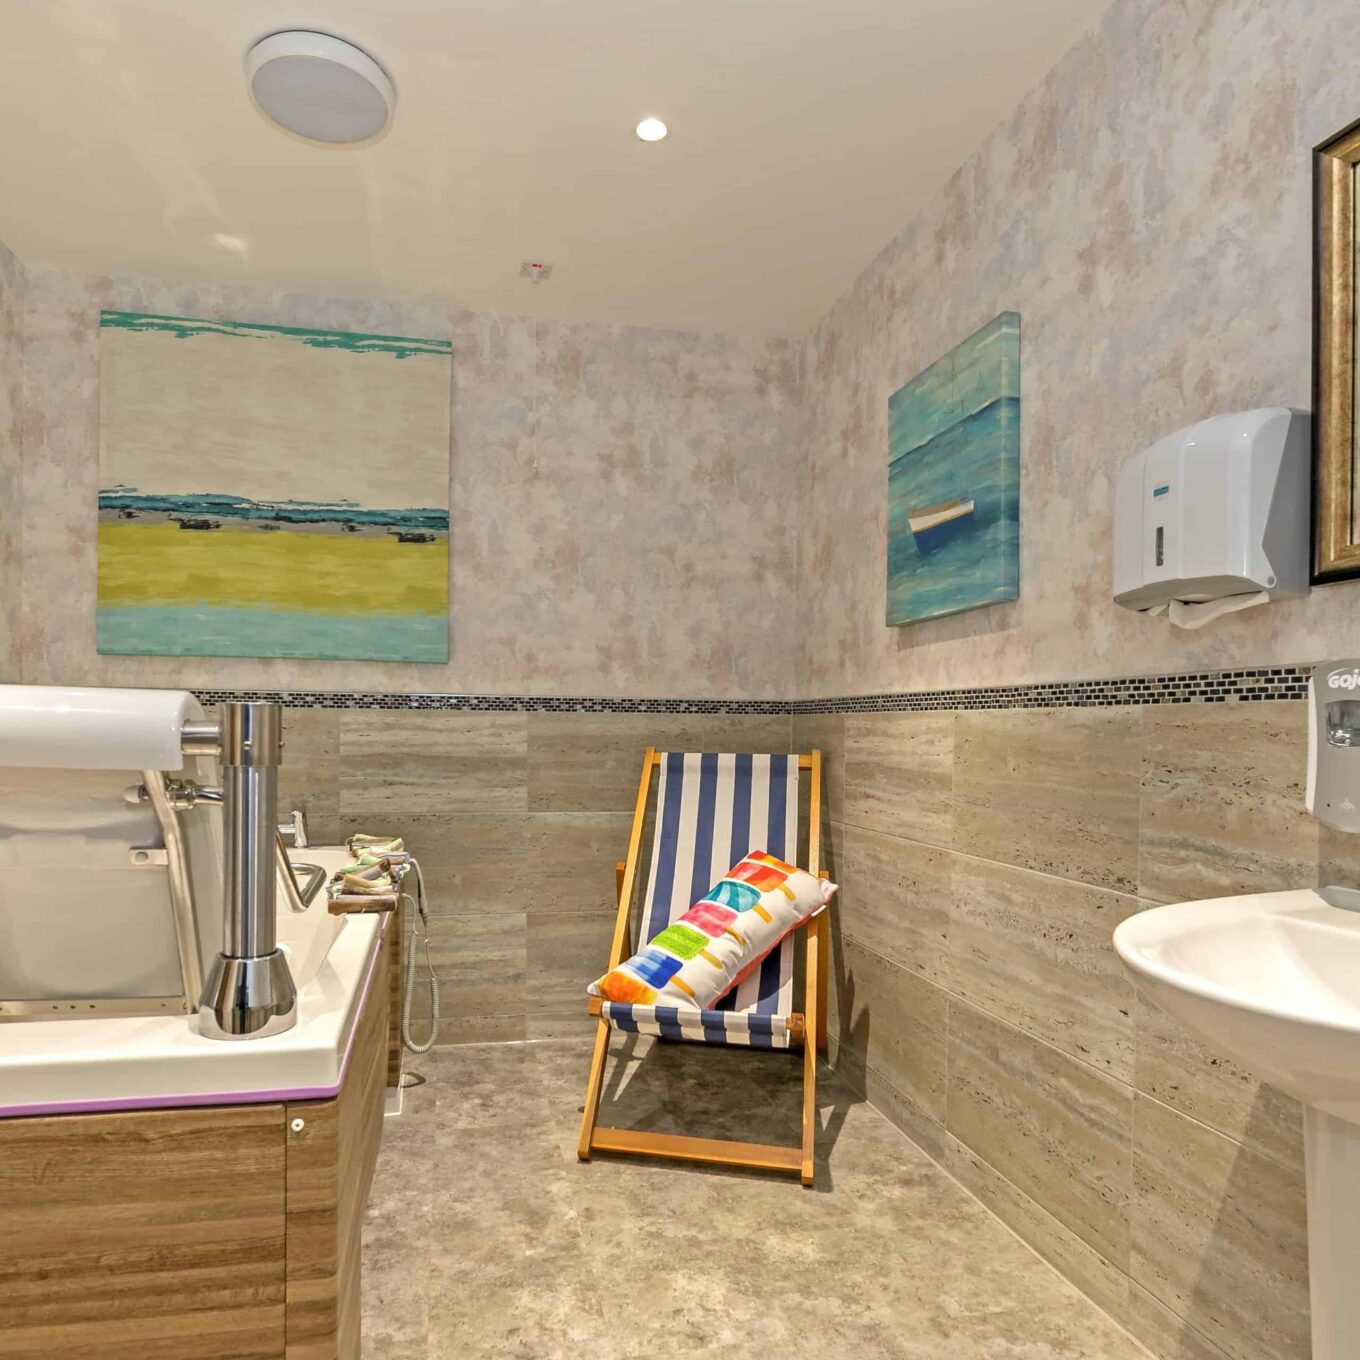 Bathroom with deck chair and bath at Beechwood Grove Care Home